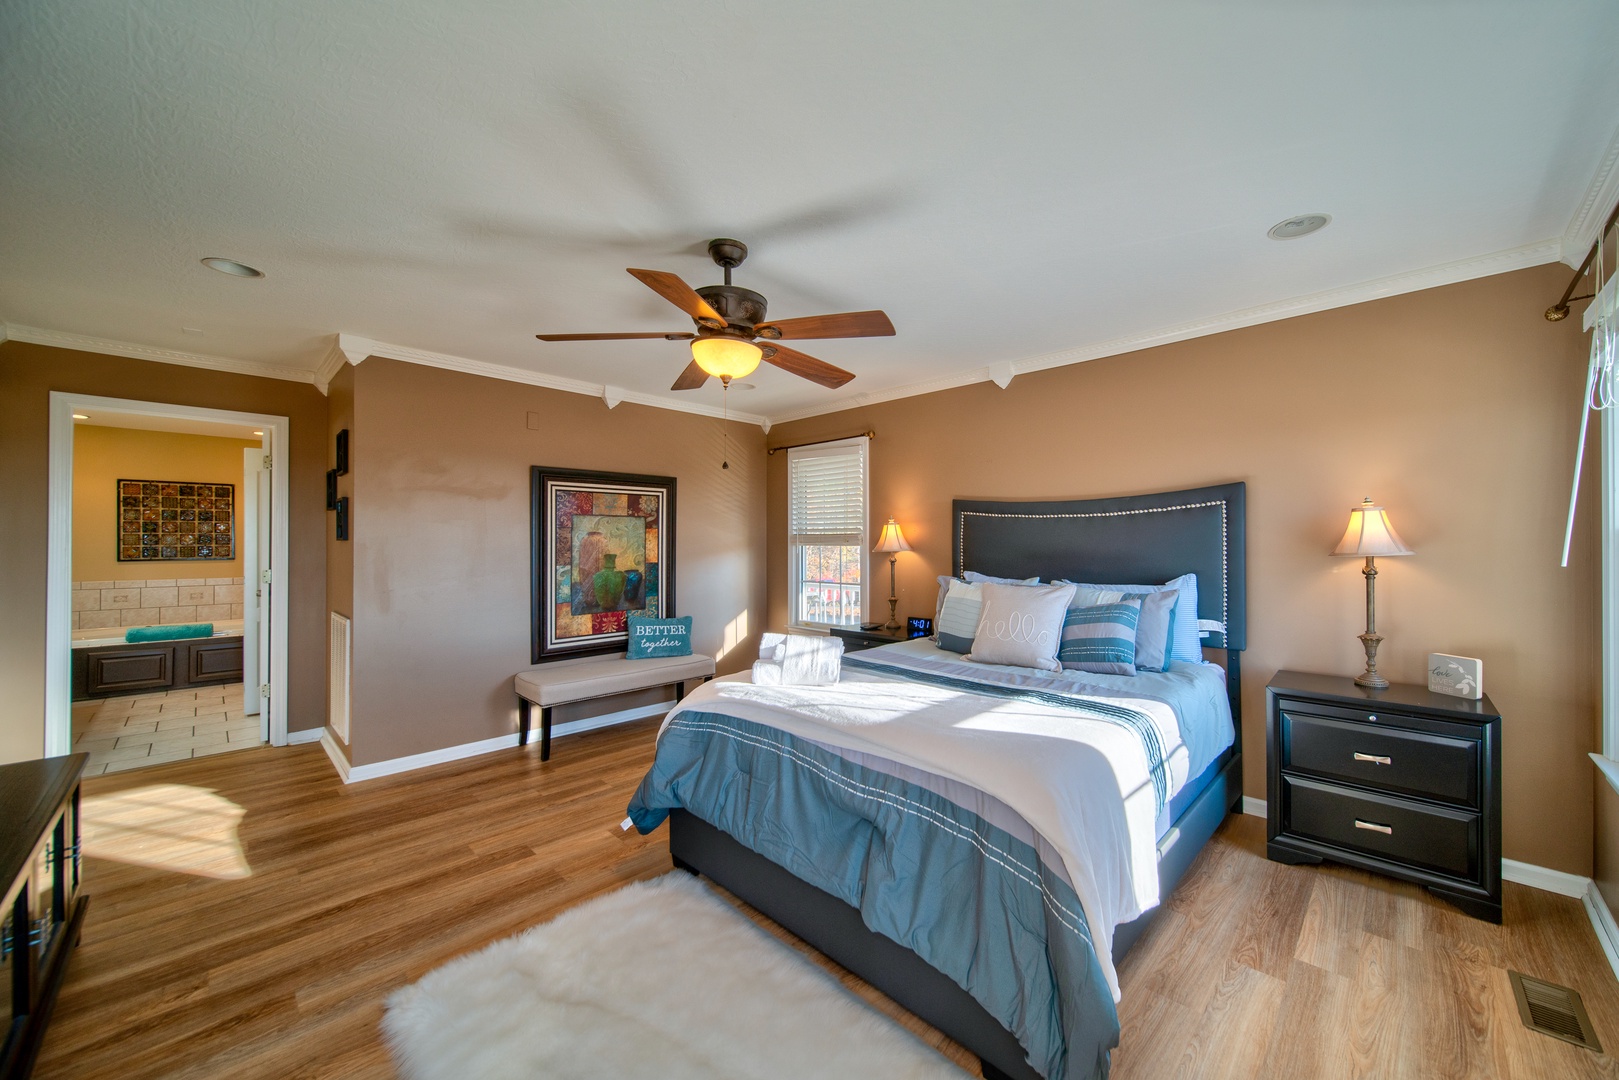 The 1st floor master suite boasts mountain views & a private ensuite bath